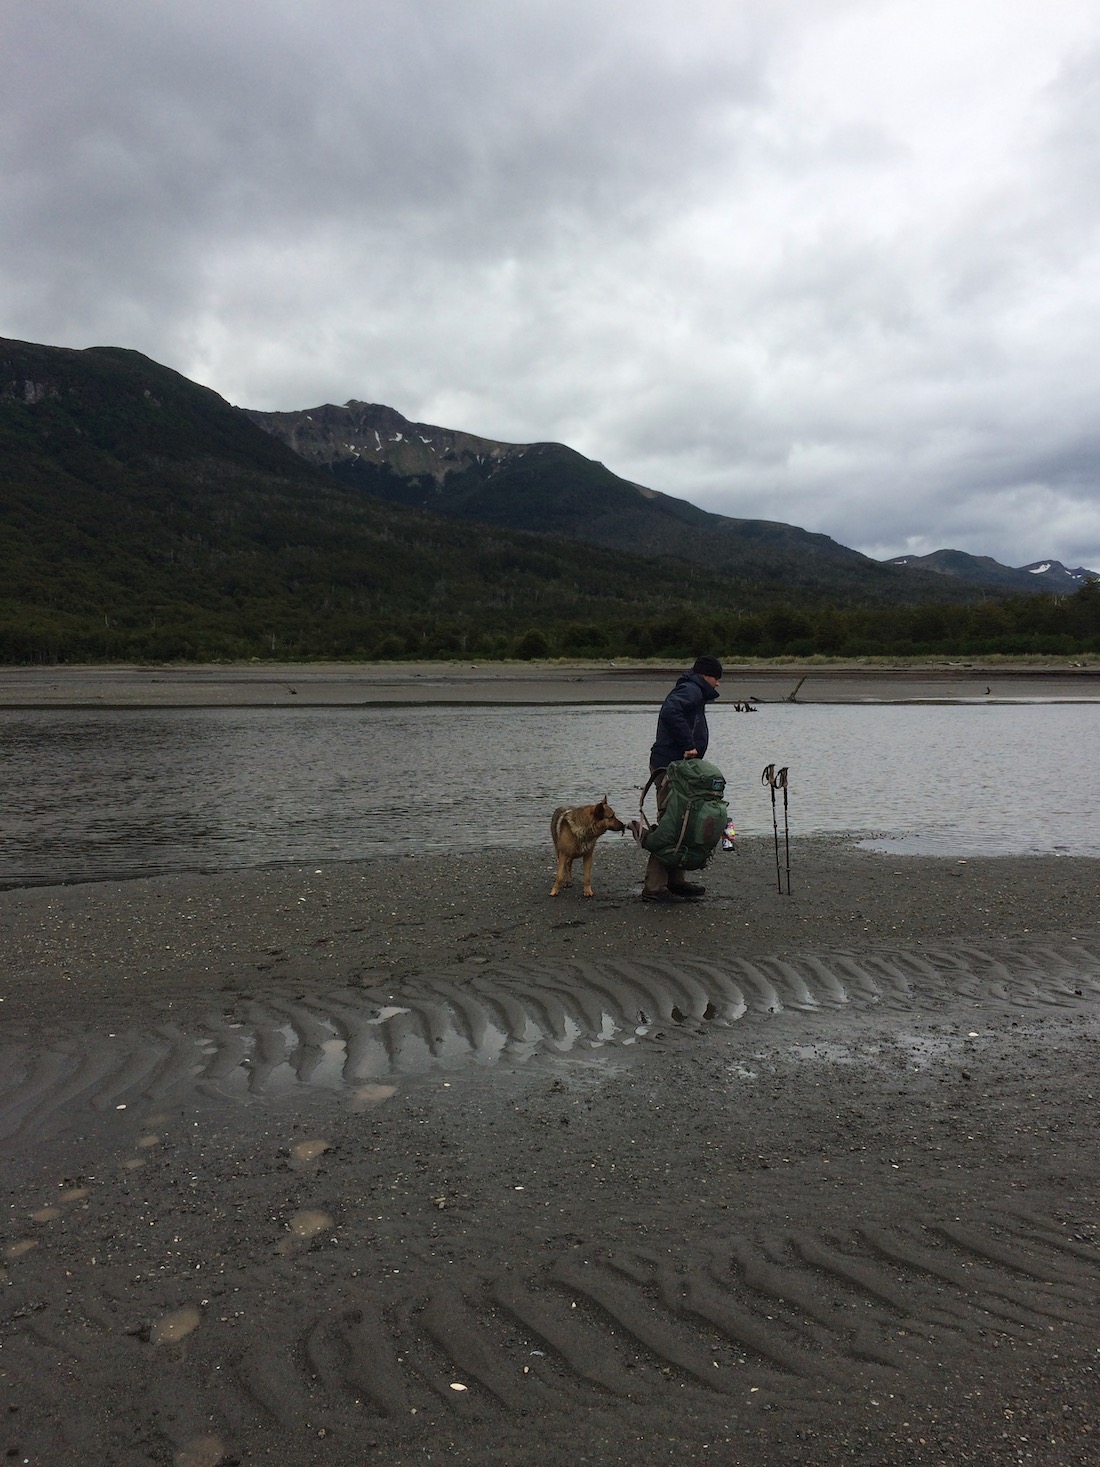 Photograph of a hiker and a dog next to a river